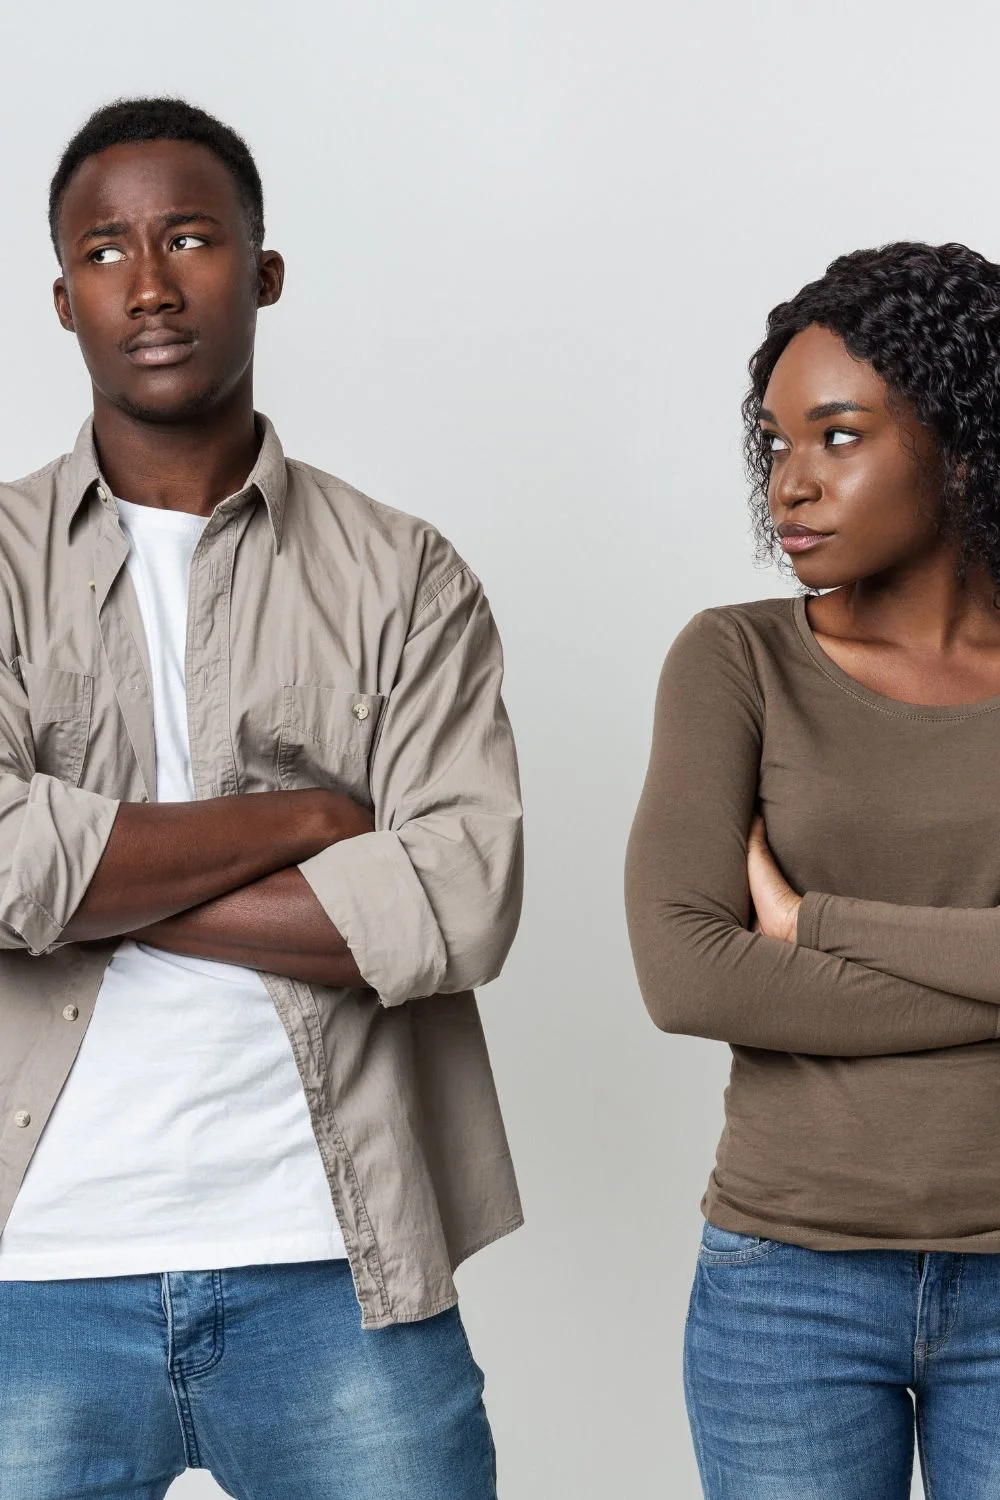 Why does my boyfriend joke about me cheating on him?